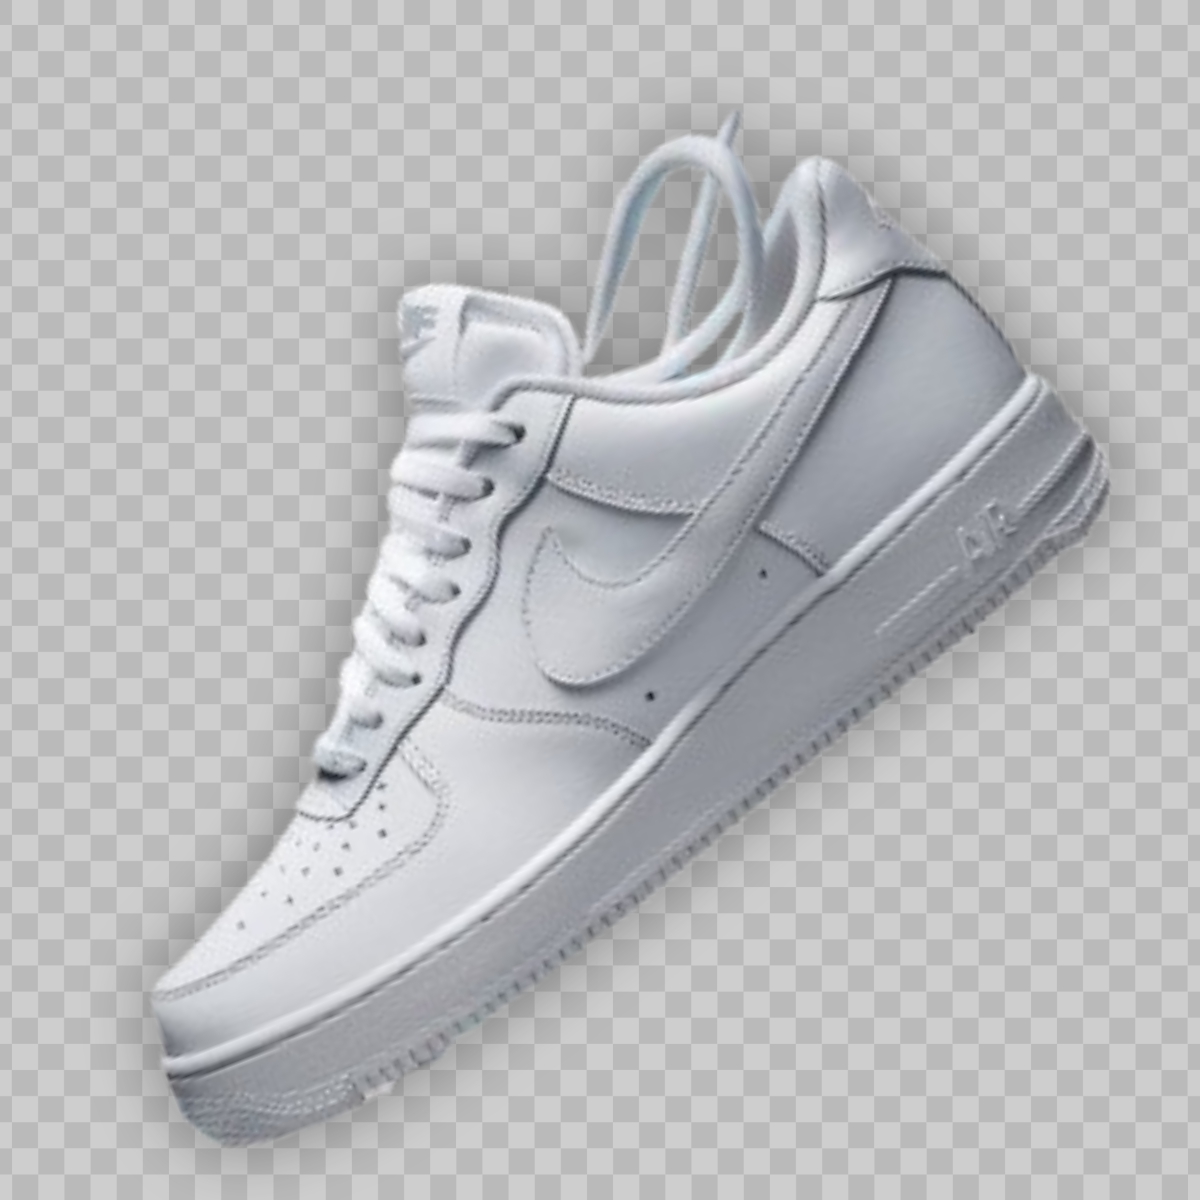 Nike Air Force 1 shoe PNG image download for free